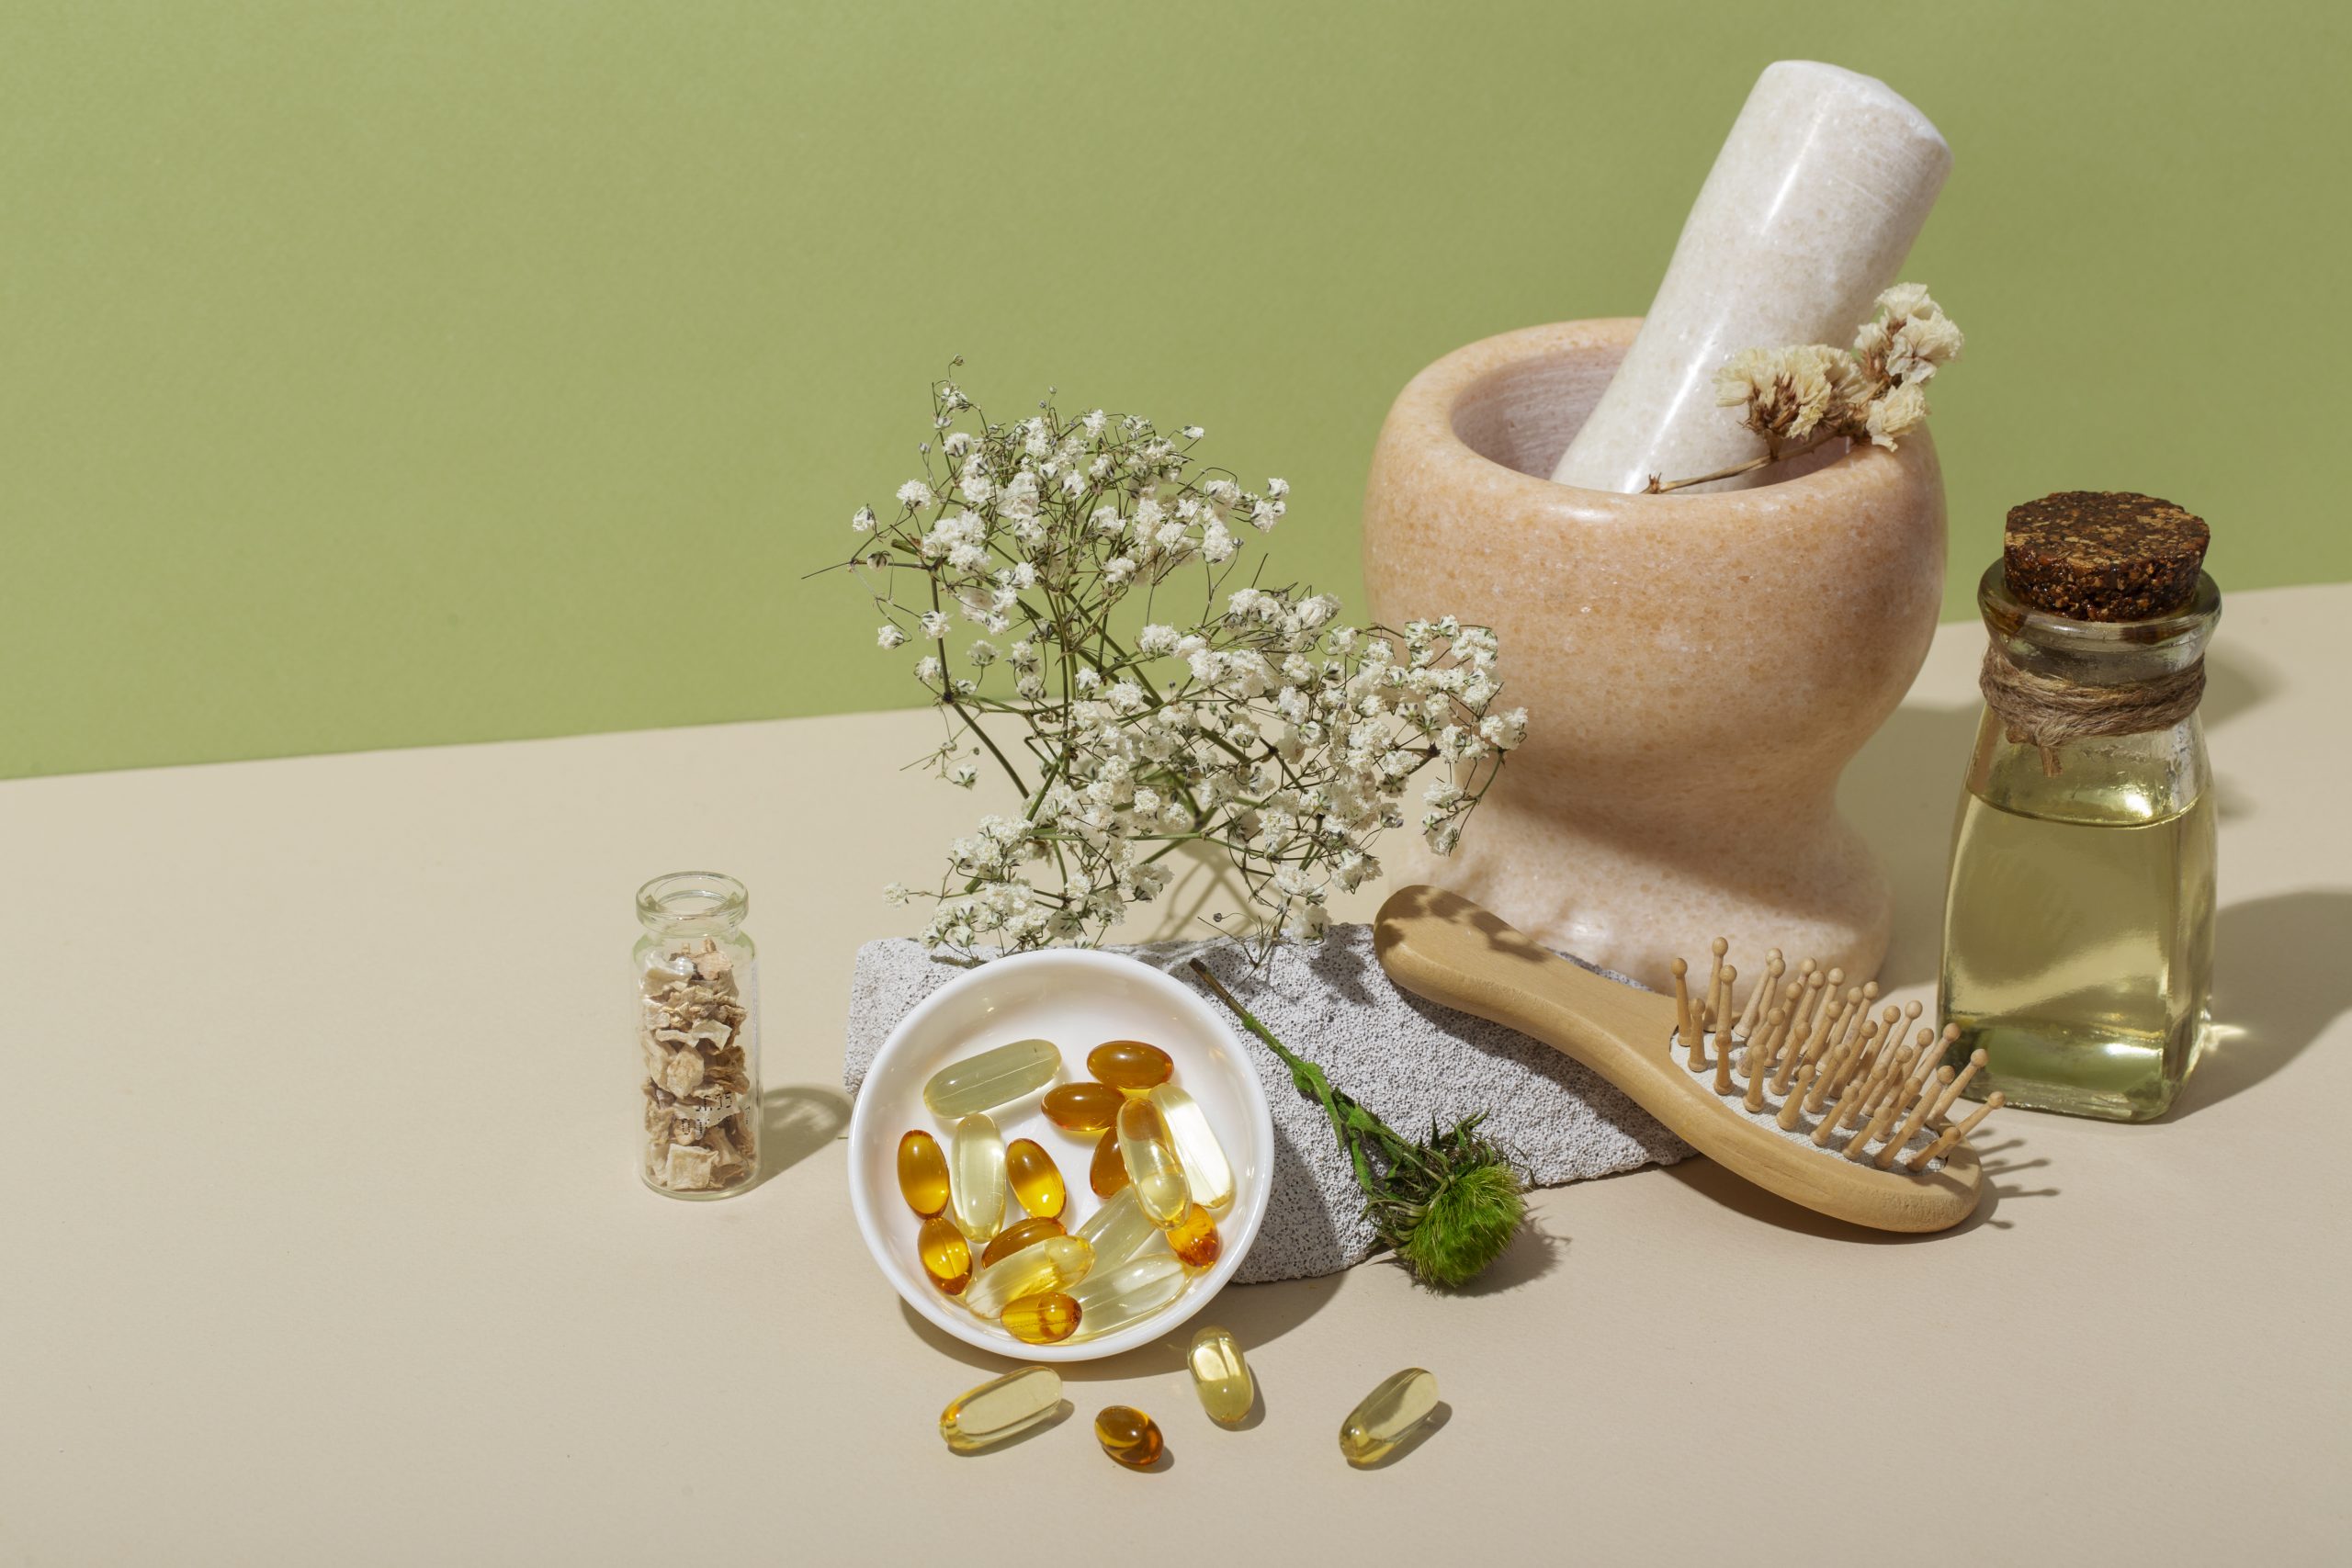 http://hijamahouse.com/wp-content/uploads/2023/01/phytotherapy-products-arrangement-high-angle-scaled.jpg